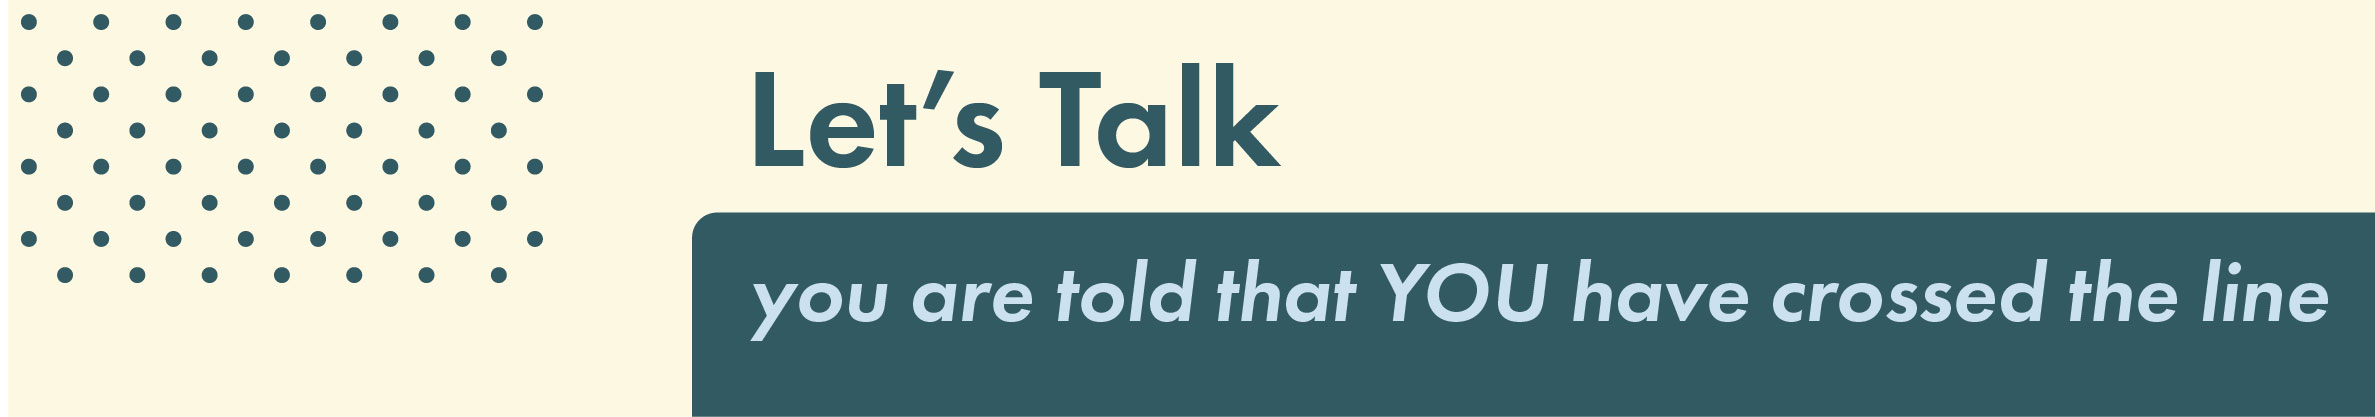 Let's Talk: You are Told that YOU Have Crossed the Line